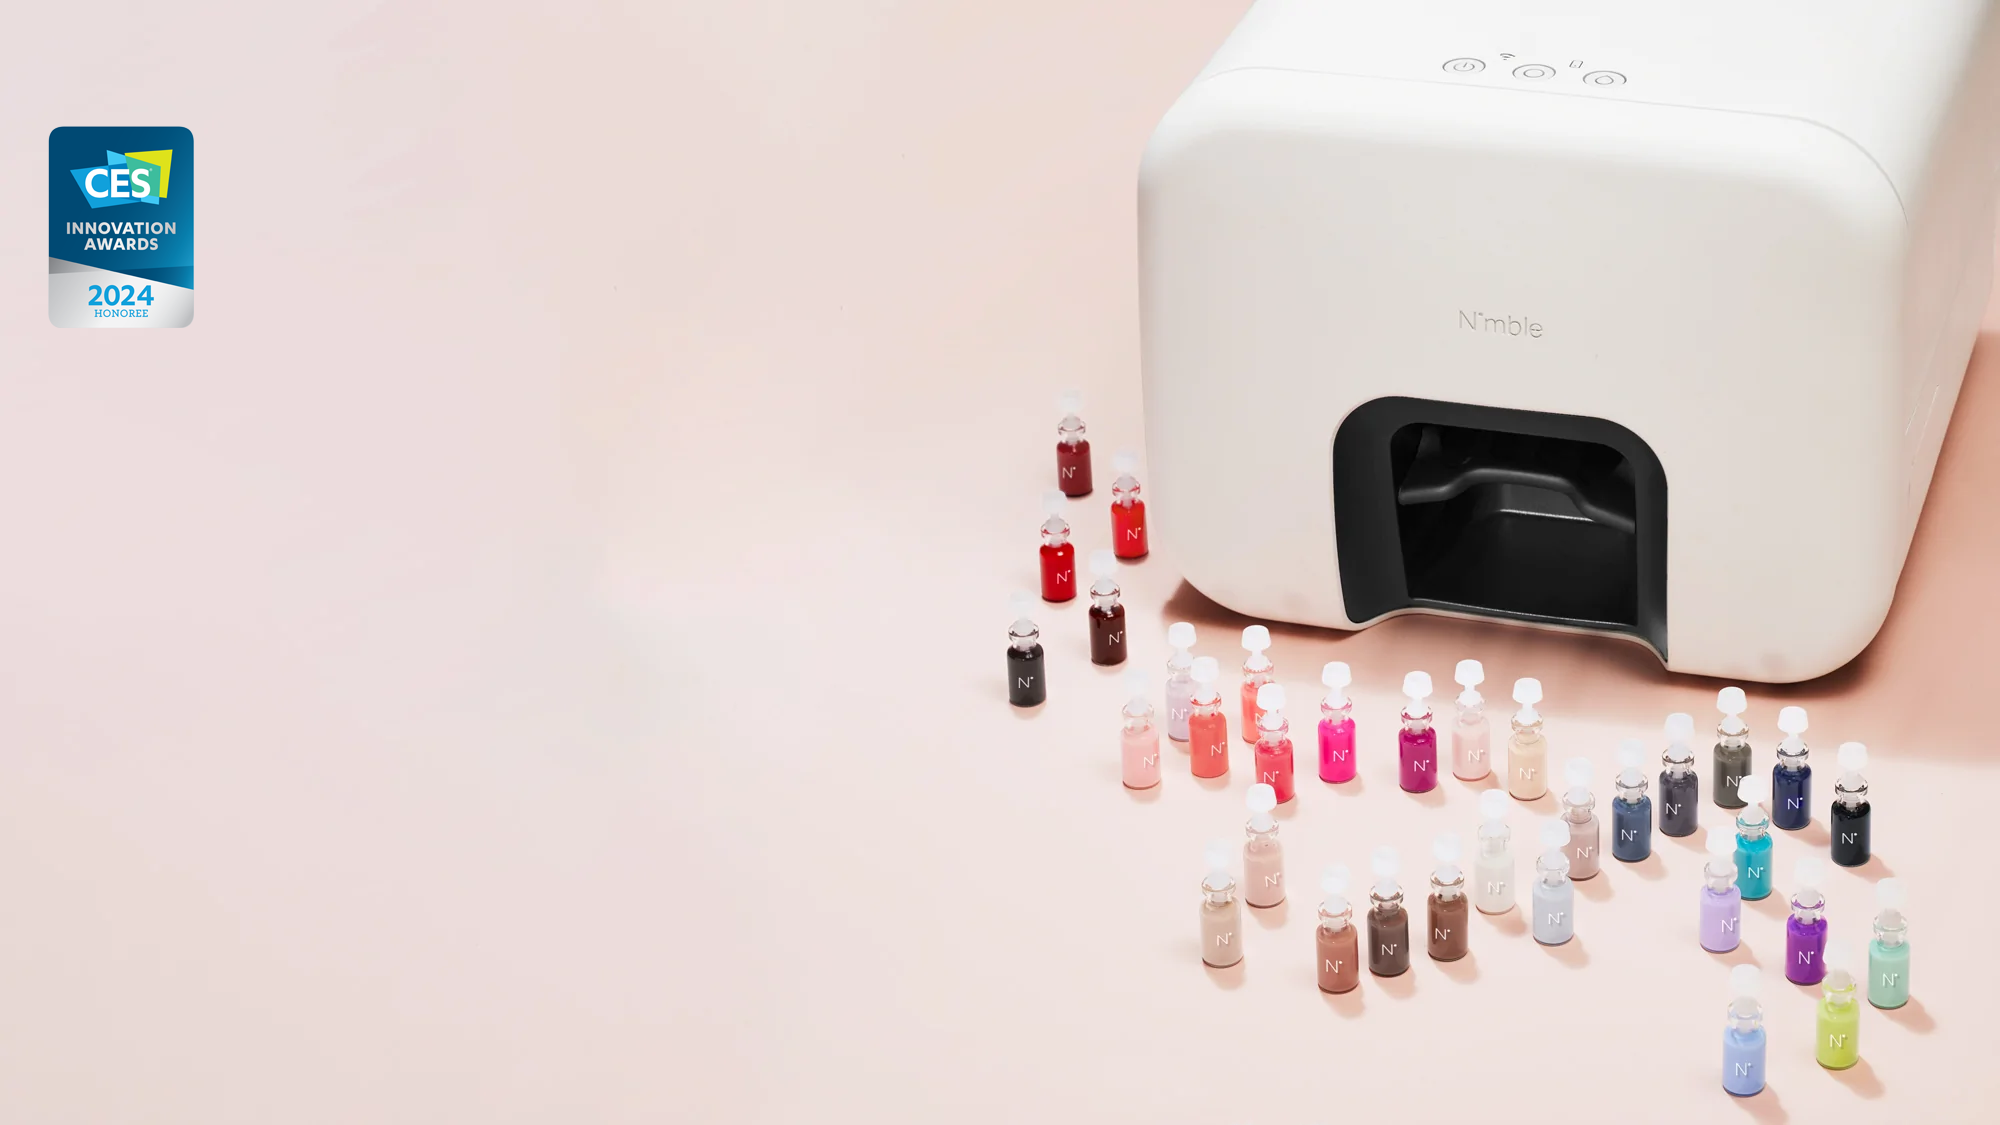 Nimble at-home nail painter paints and dries your nails with the